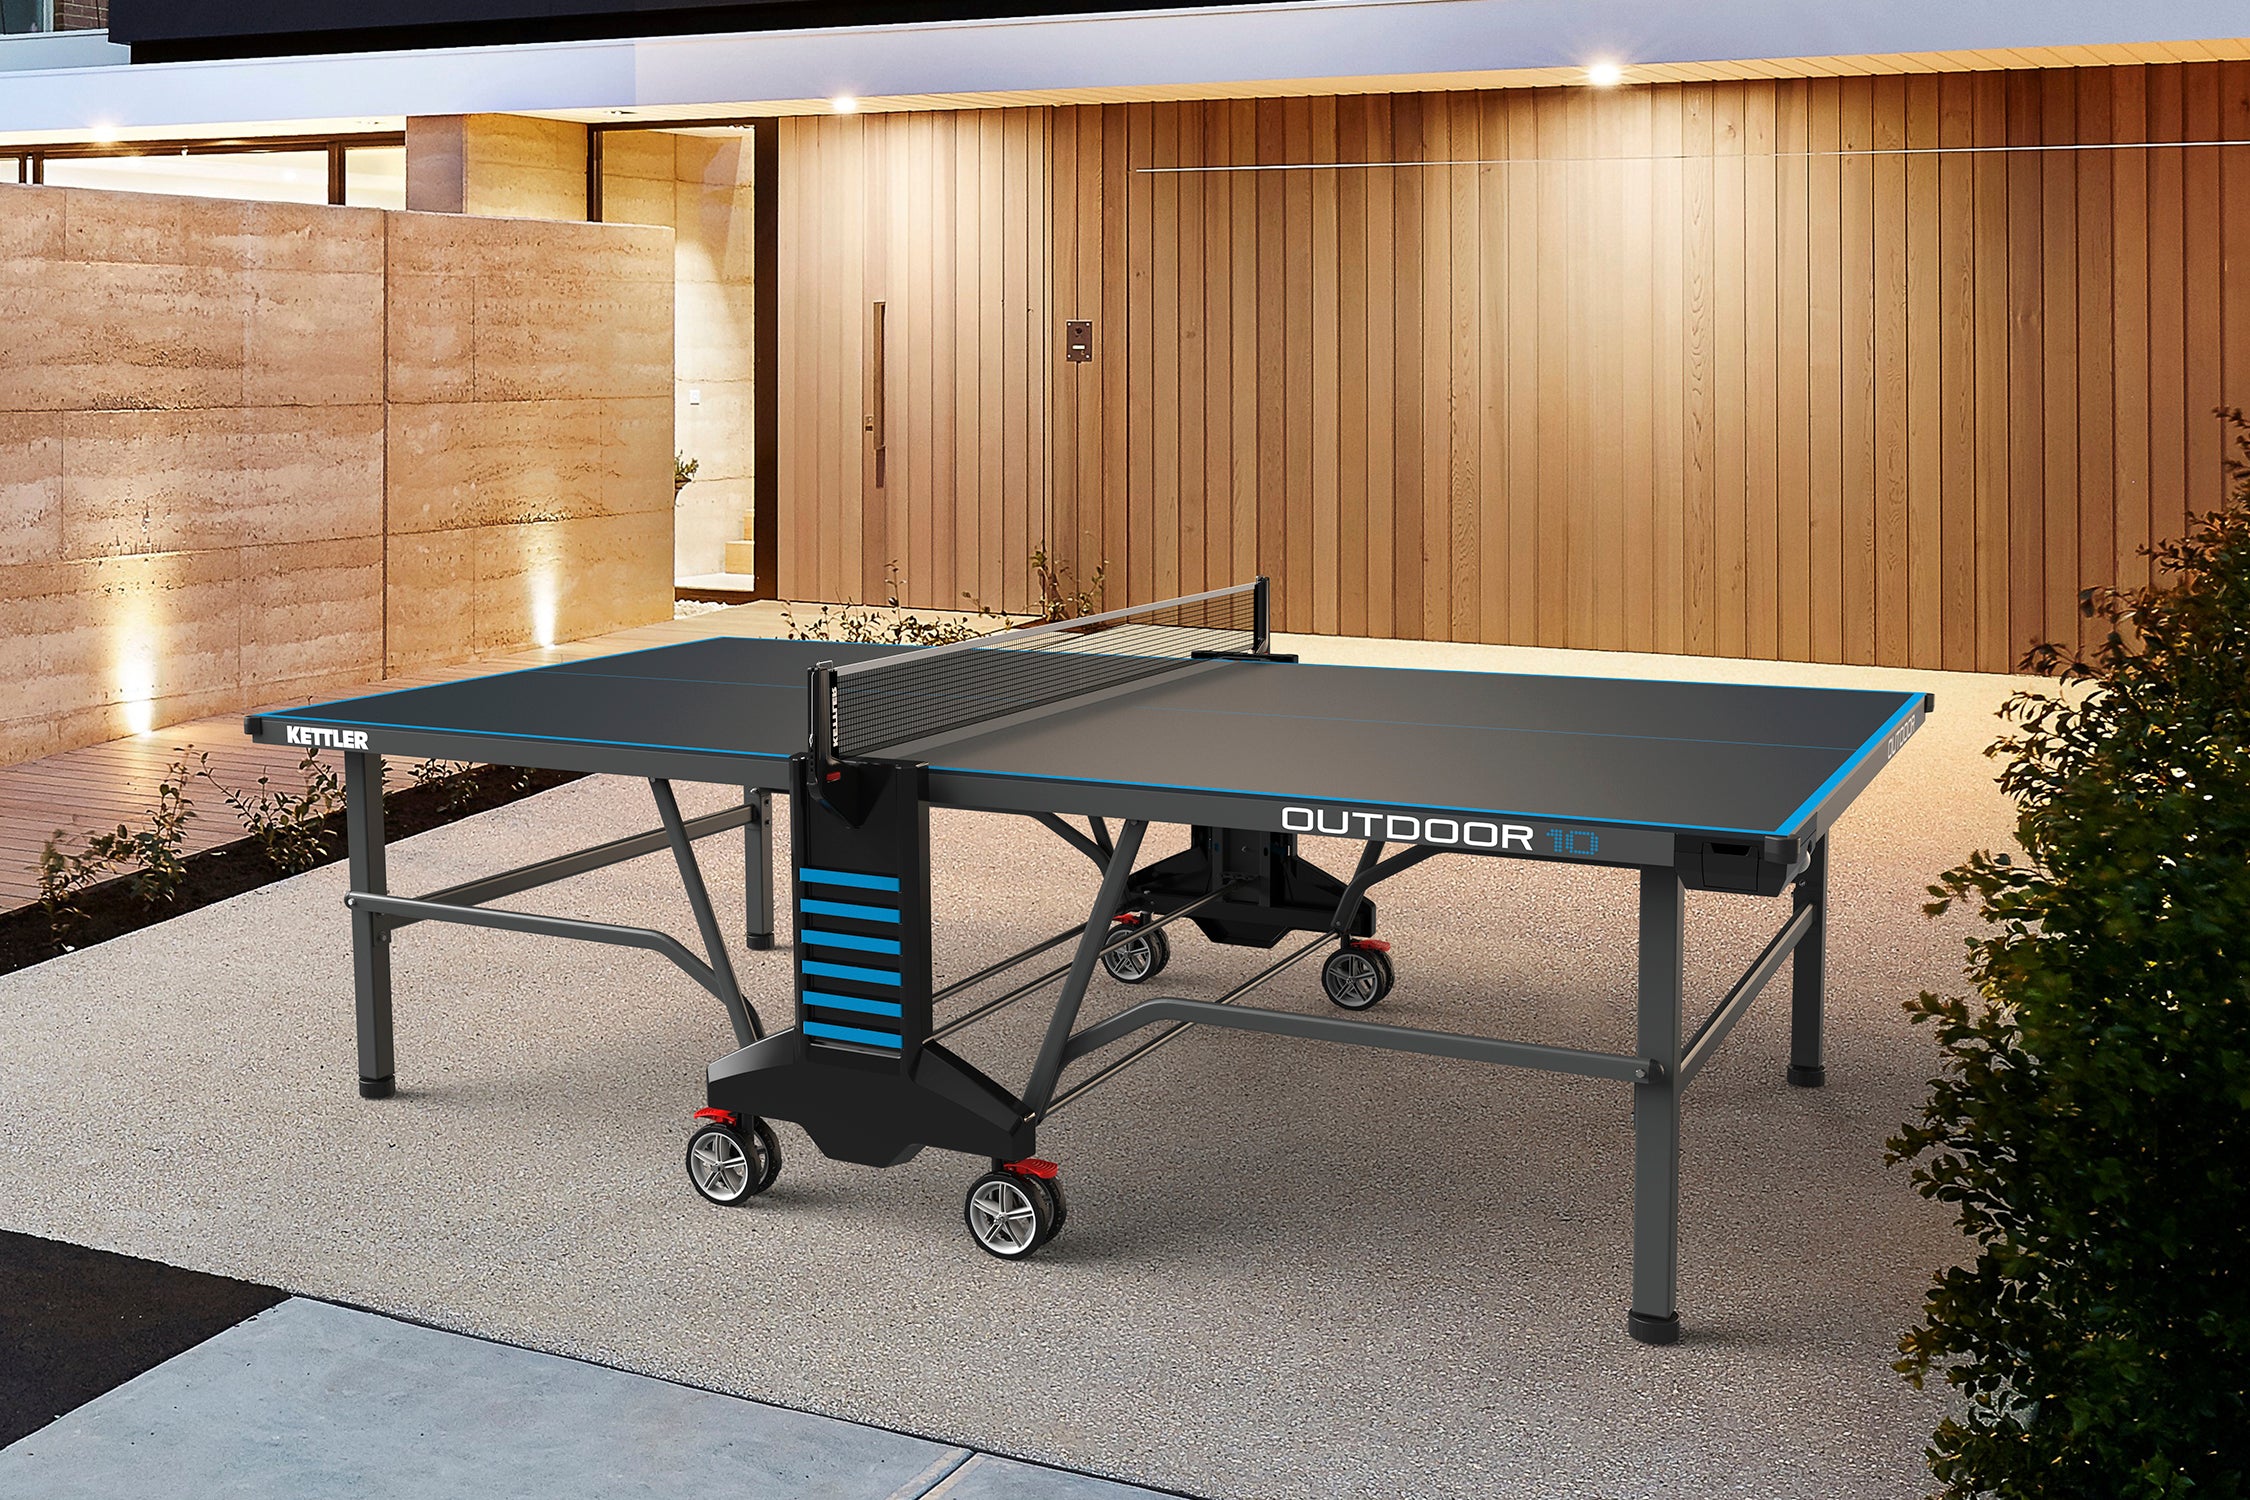 Lifestyle shot of outdoor table tennis table designed in germany